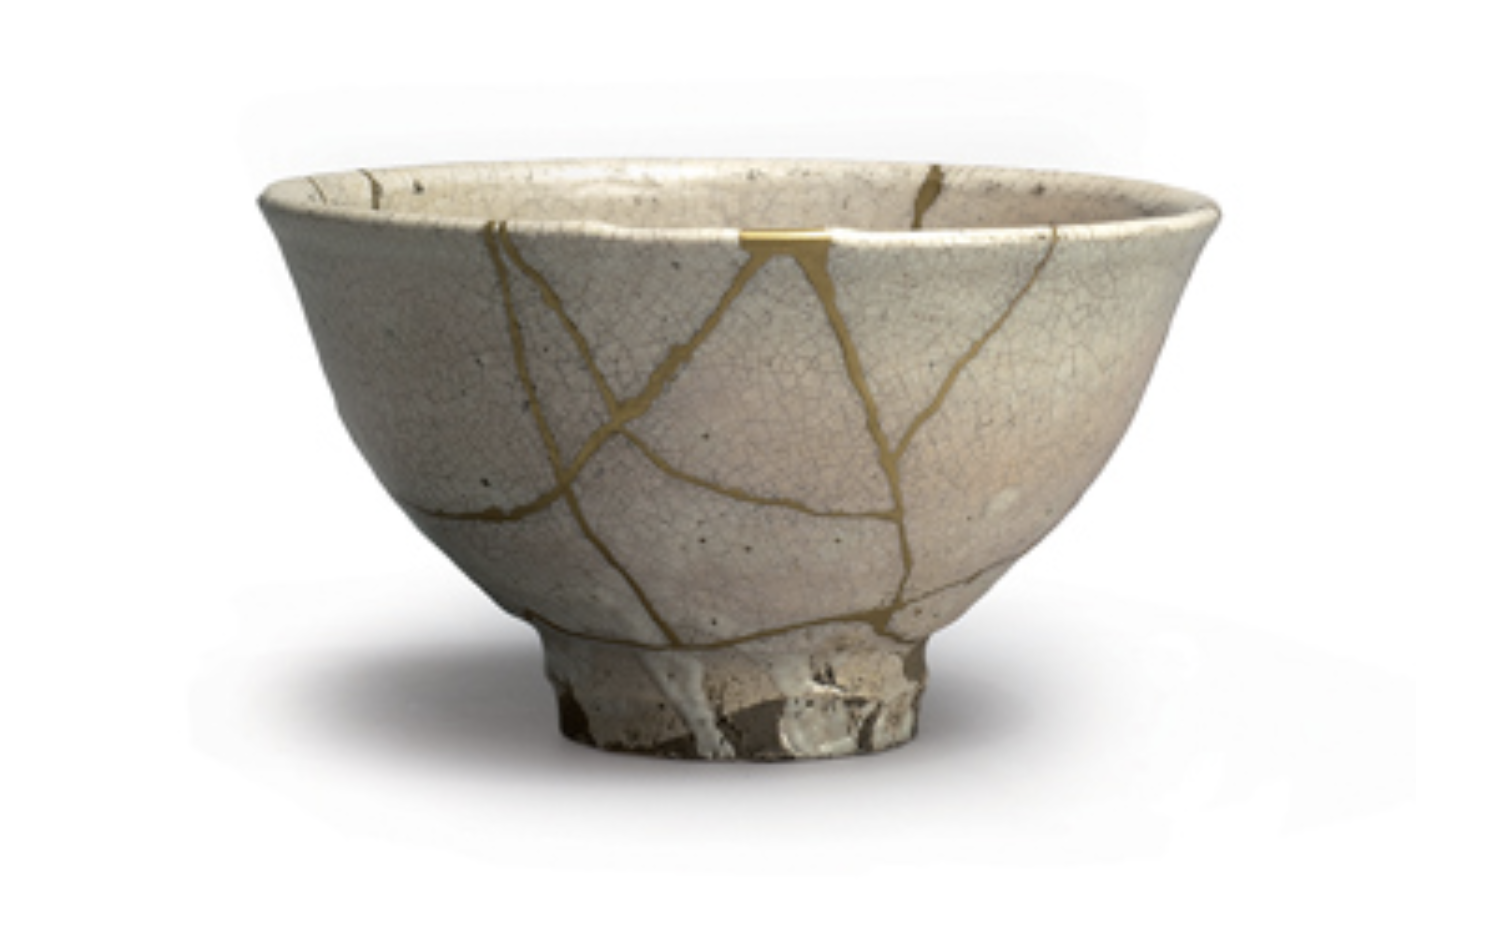 What the Japanese art of Kintsugi can teach us about healing trauma.